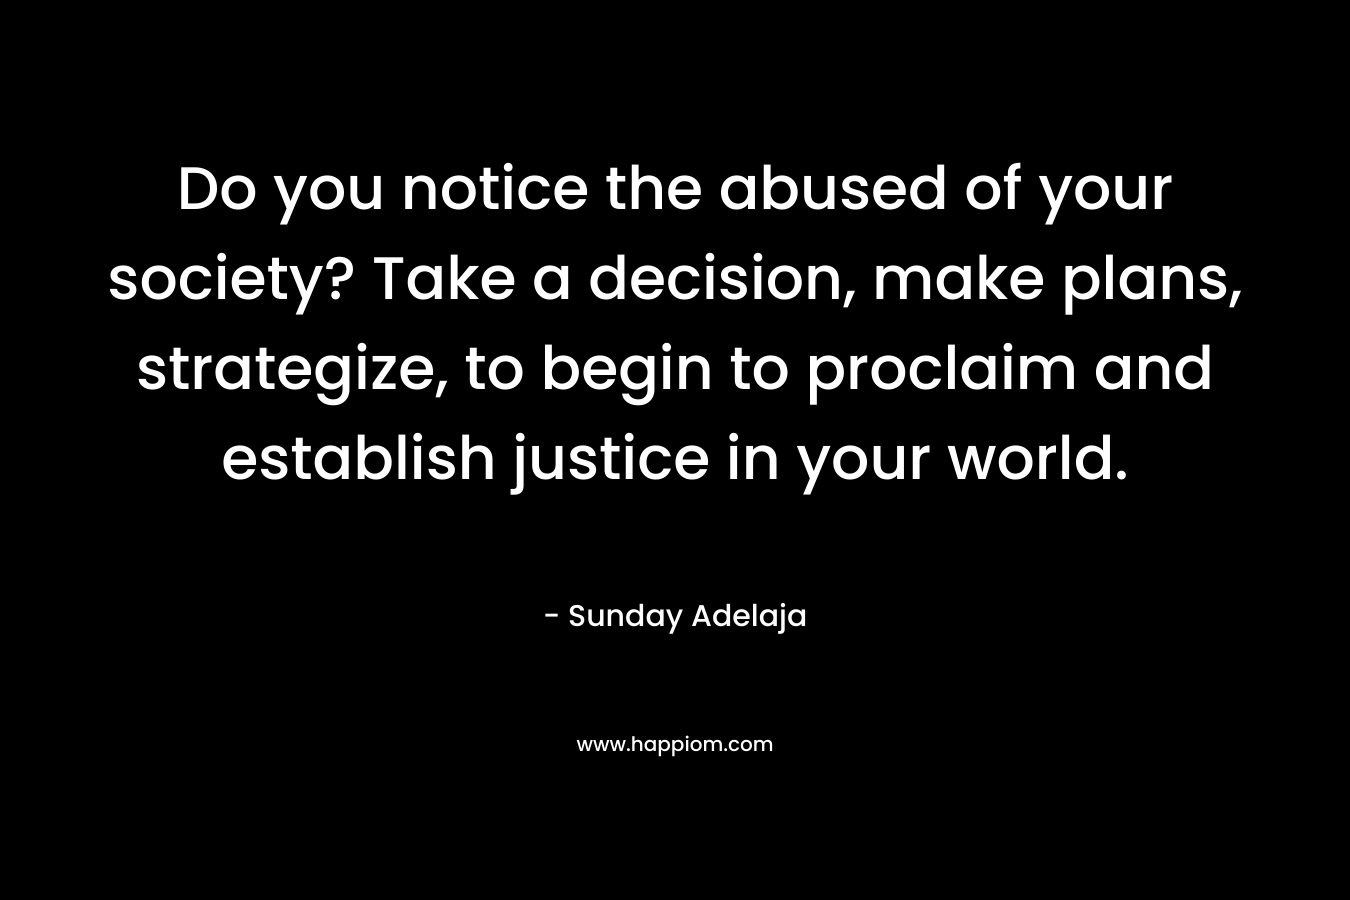 Do you notice the abused of your society? Take a decision, make plans, strategize, to begin to proclaim and establish justice in your world. – Sunday Adelaja